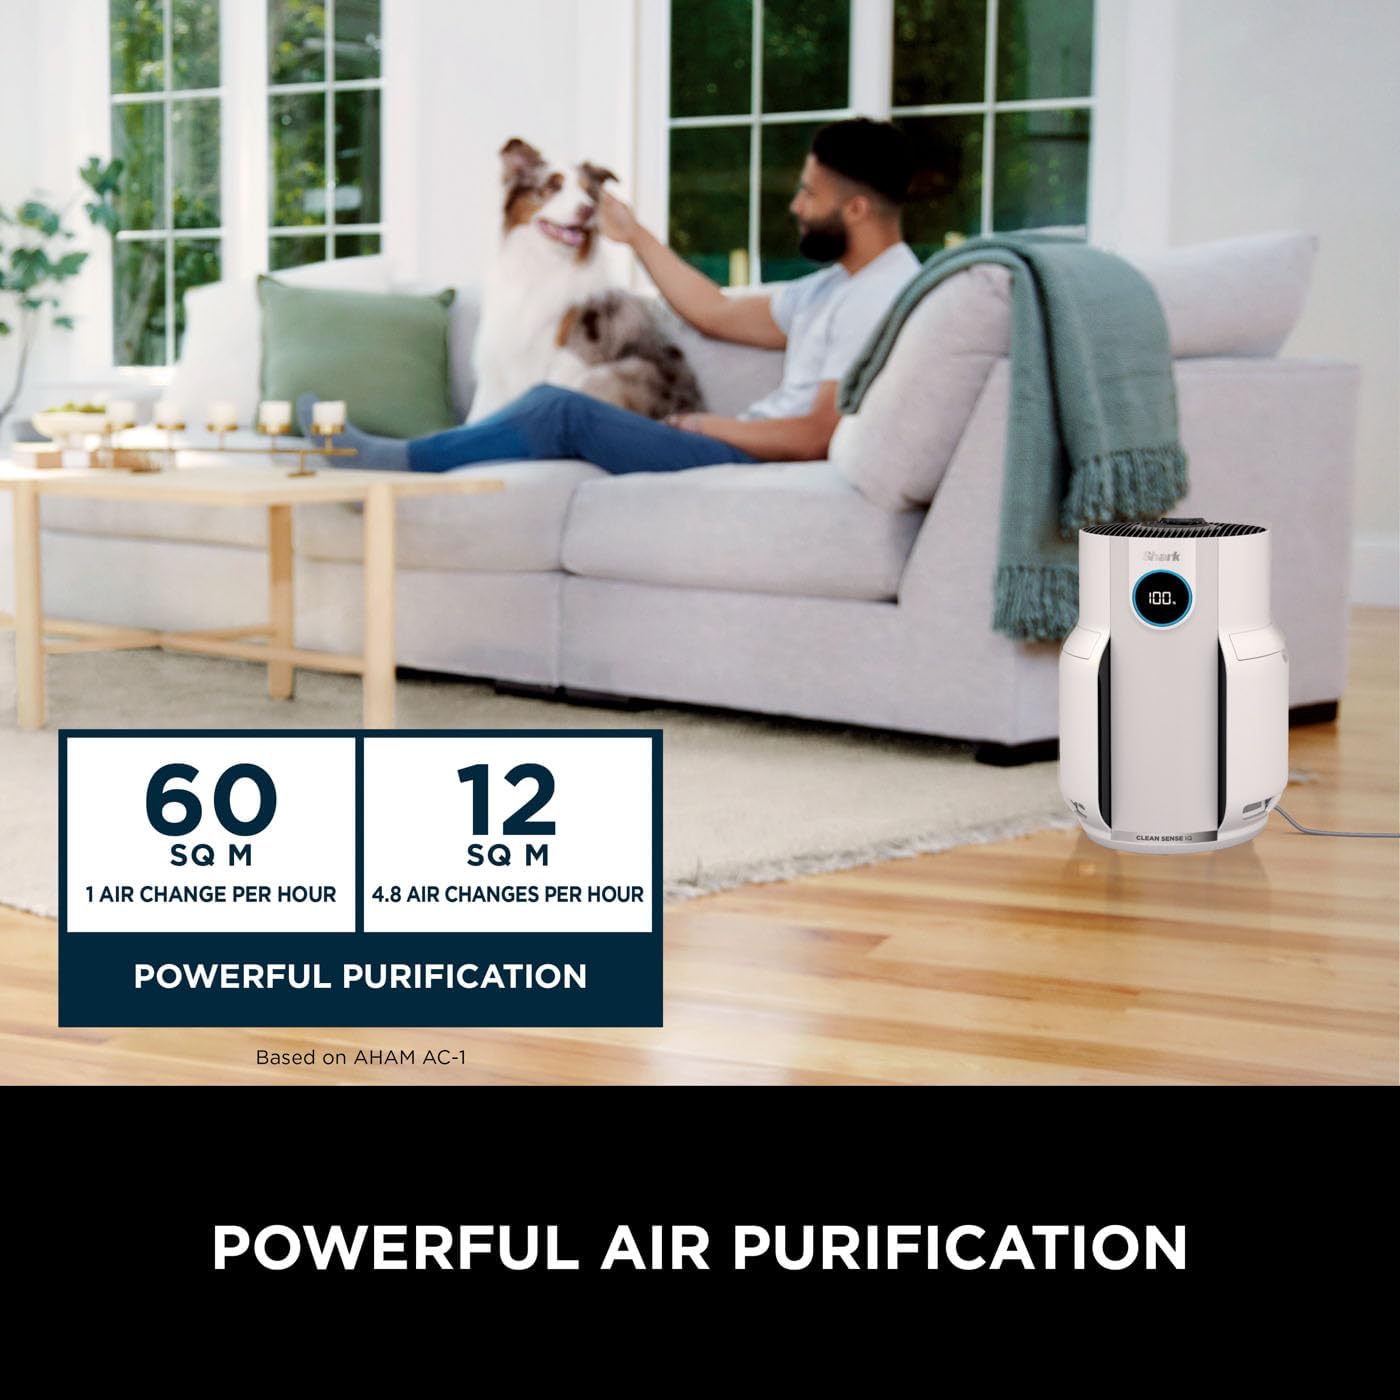 Shark NeverChange5 Air Purifier for Home, Bedroom, Room Coverage 60sqm, 5 - Year HEPA Filter Traps 99.97% of Allergens including Dust, Pollen, Pet Dander, Auto Mode, Quiet, LED Display, White HP150UK - Amazing Gadgets Outlet